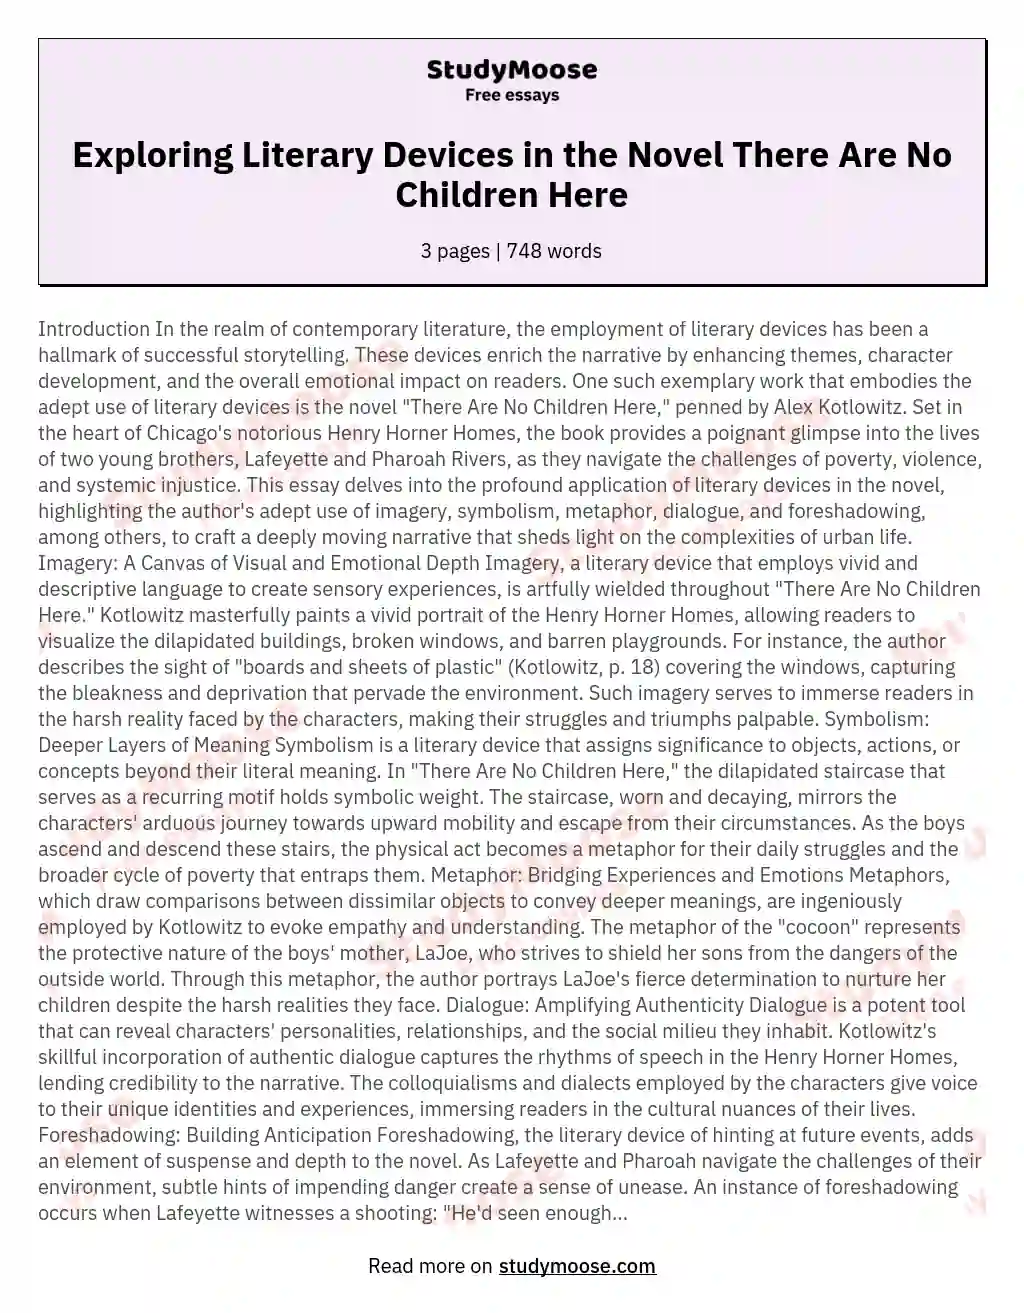 Exploring Literary Devices in the Novel There Are No Children Here essay